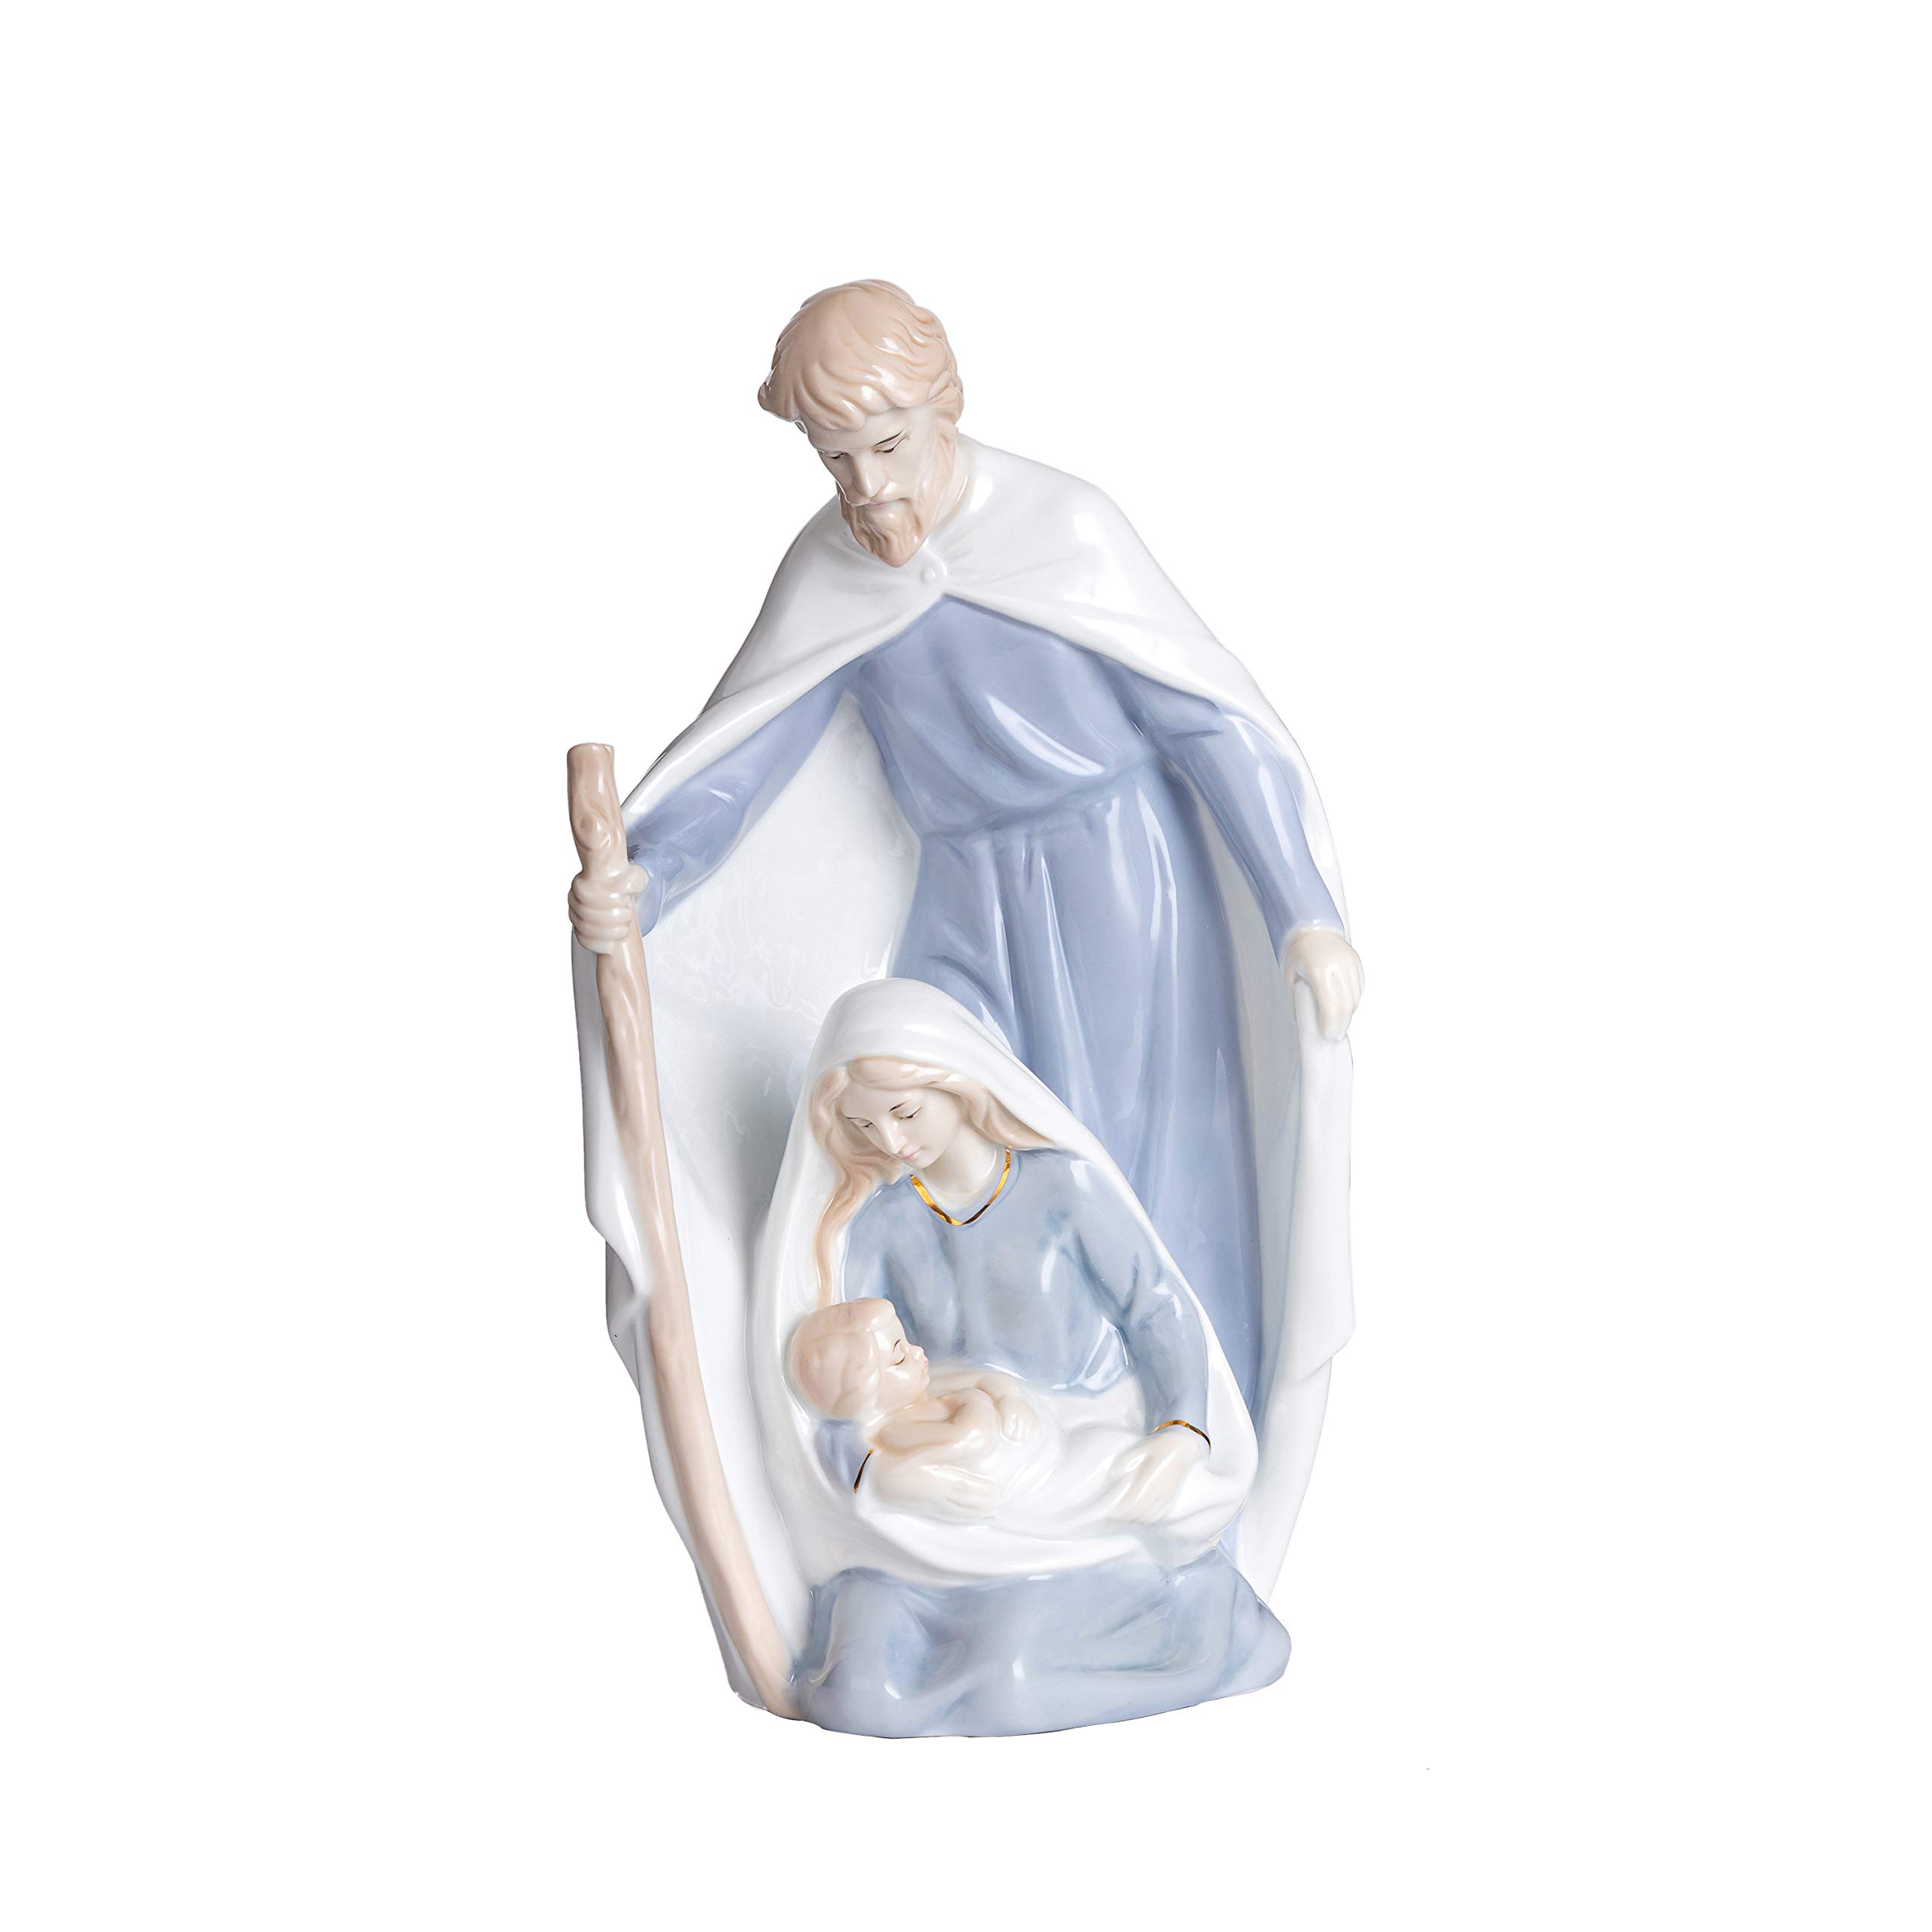 Holy Family Statue,11 inches Saint Joseph Statue, Full Foam Gift Box Packaging Ceramic Statue for Parents and Elders Who Love Religious Inspiration...